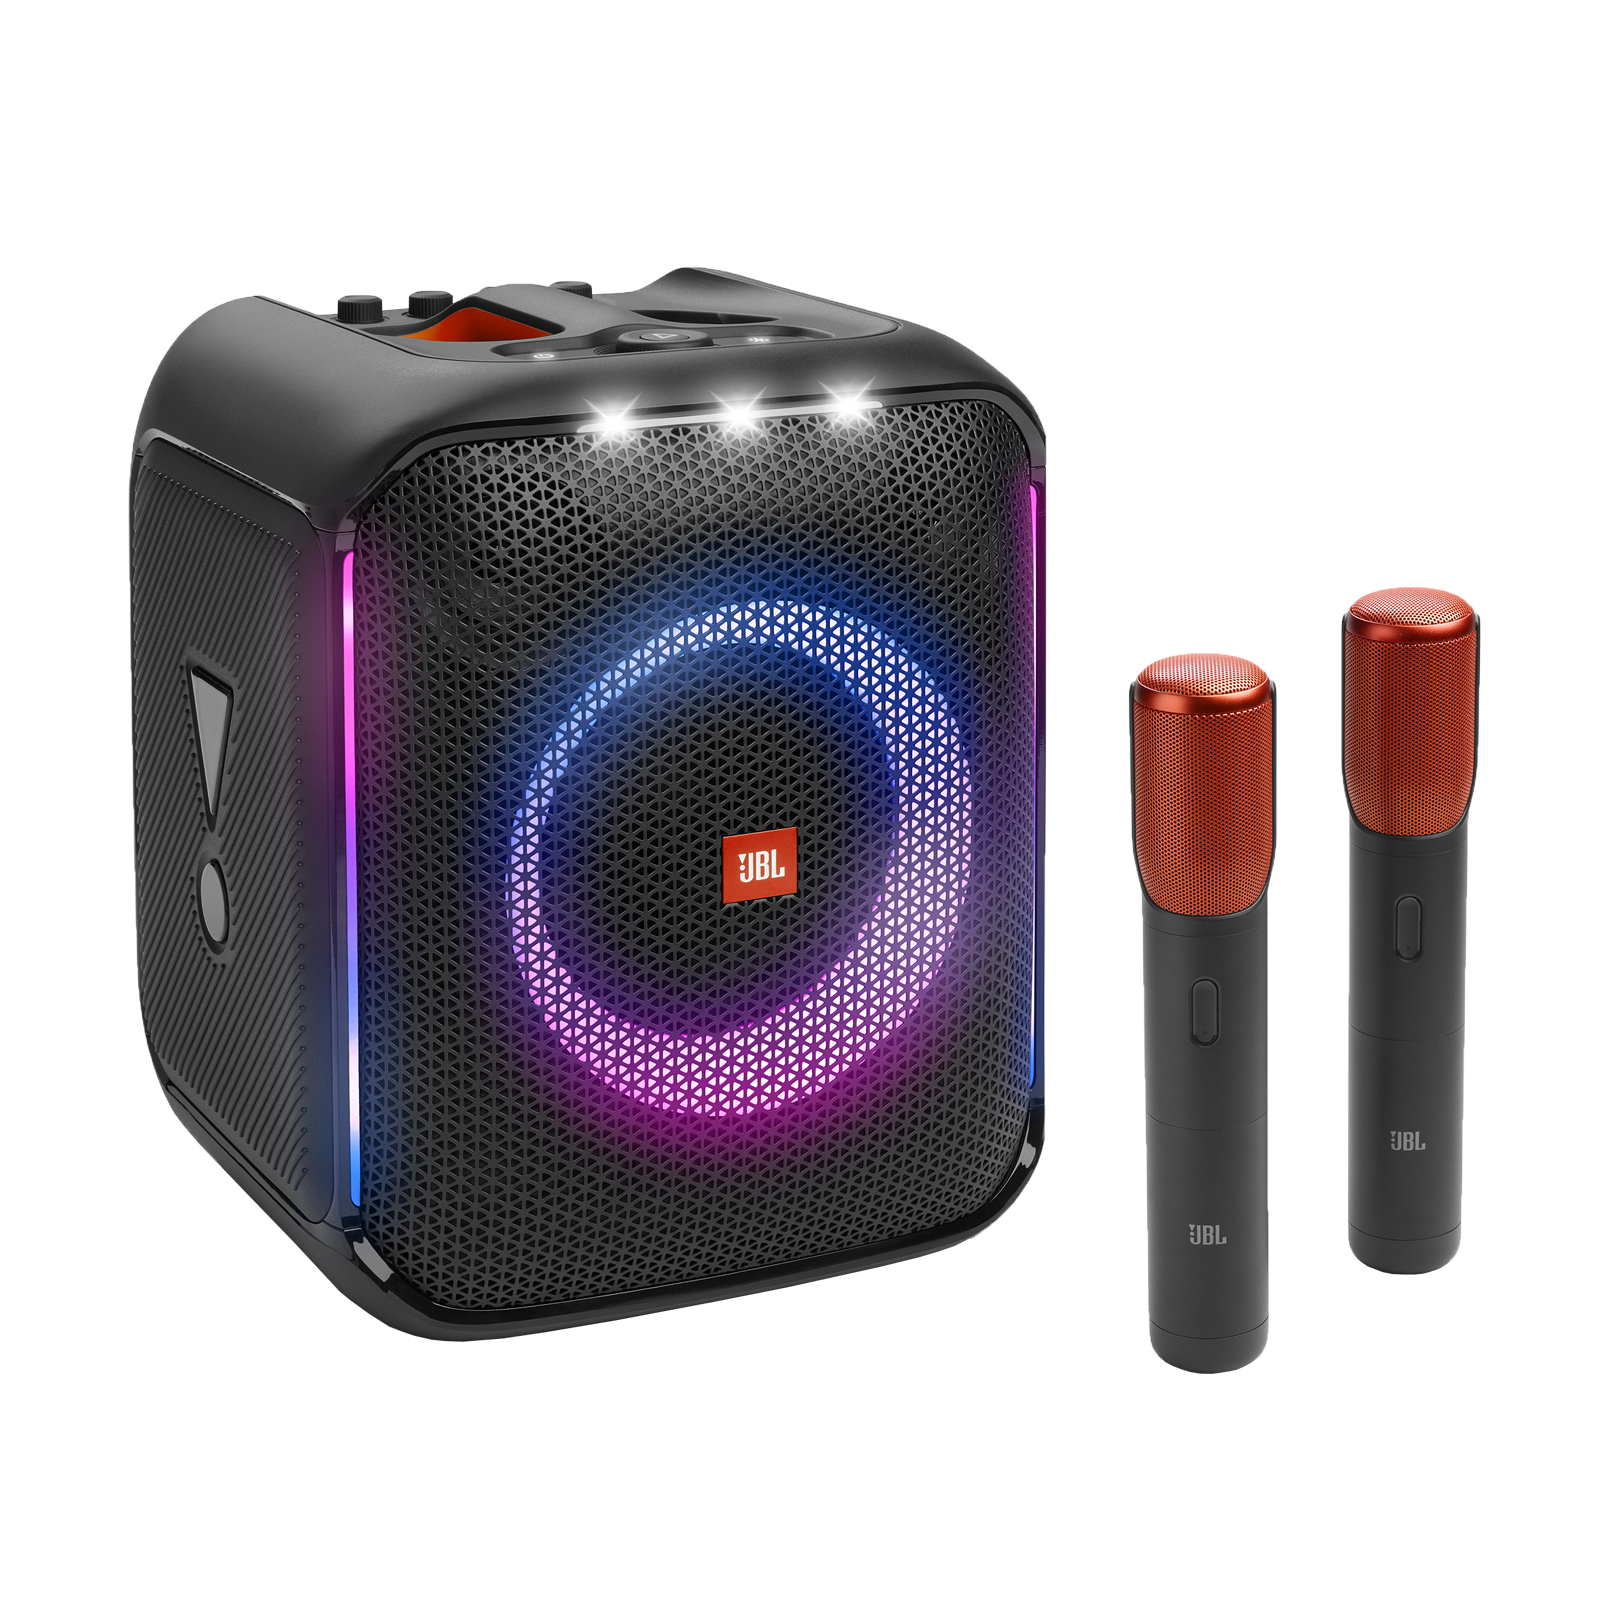 Jbl Partybox Encore | Portable Party Speaker With 100W Powerful Sound,  Built-In Dynamic Light Show, Included Digital Wireless Mics, And Splash  Proof Design.